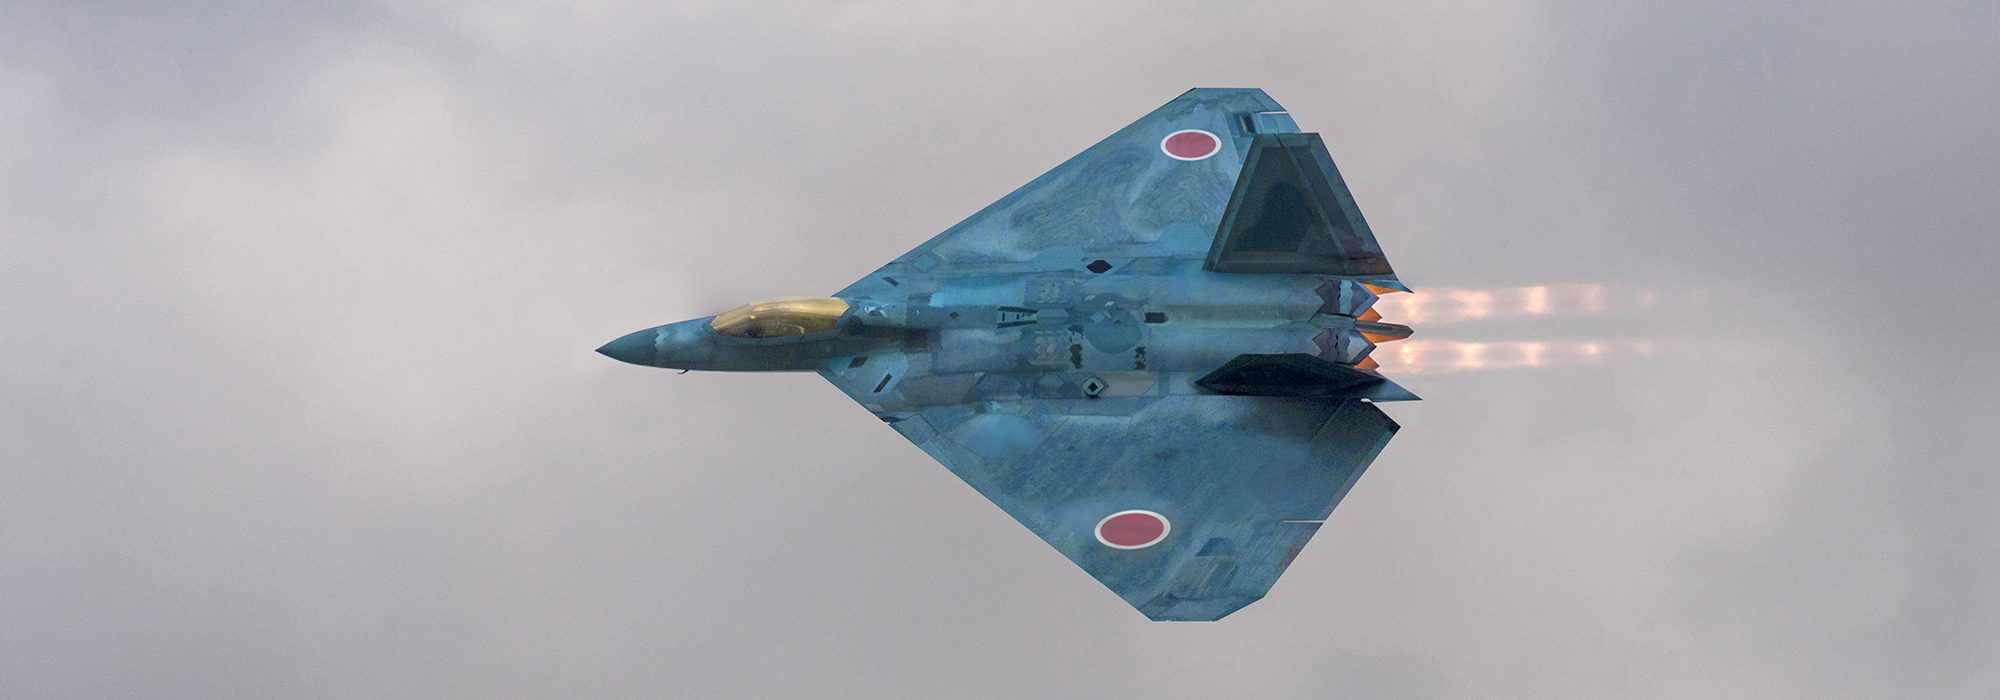 Japan Needs More Fifth-Generation Jets